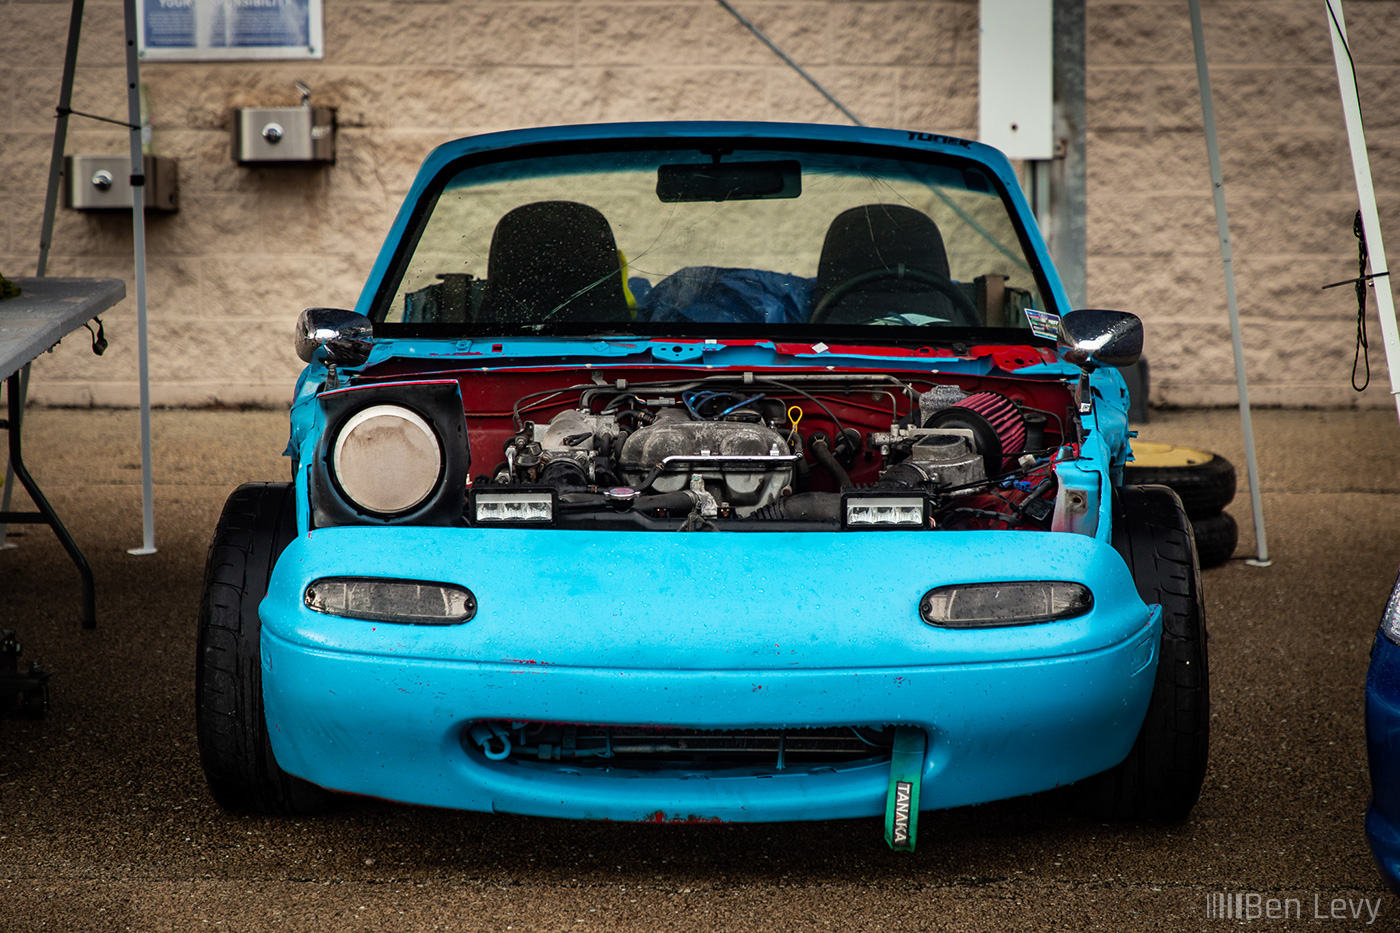 Beat Up Miata that's been spraypainted blue